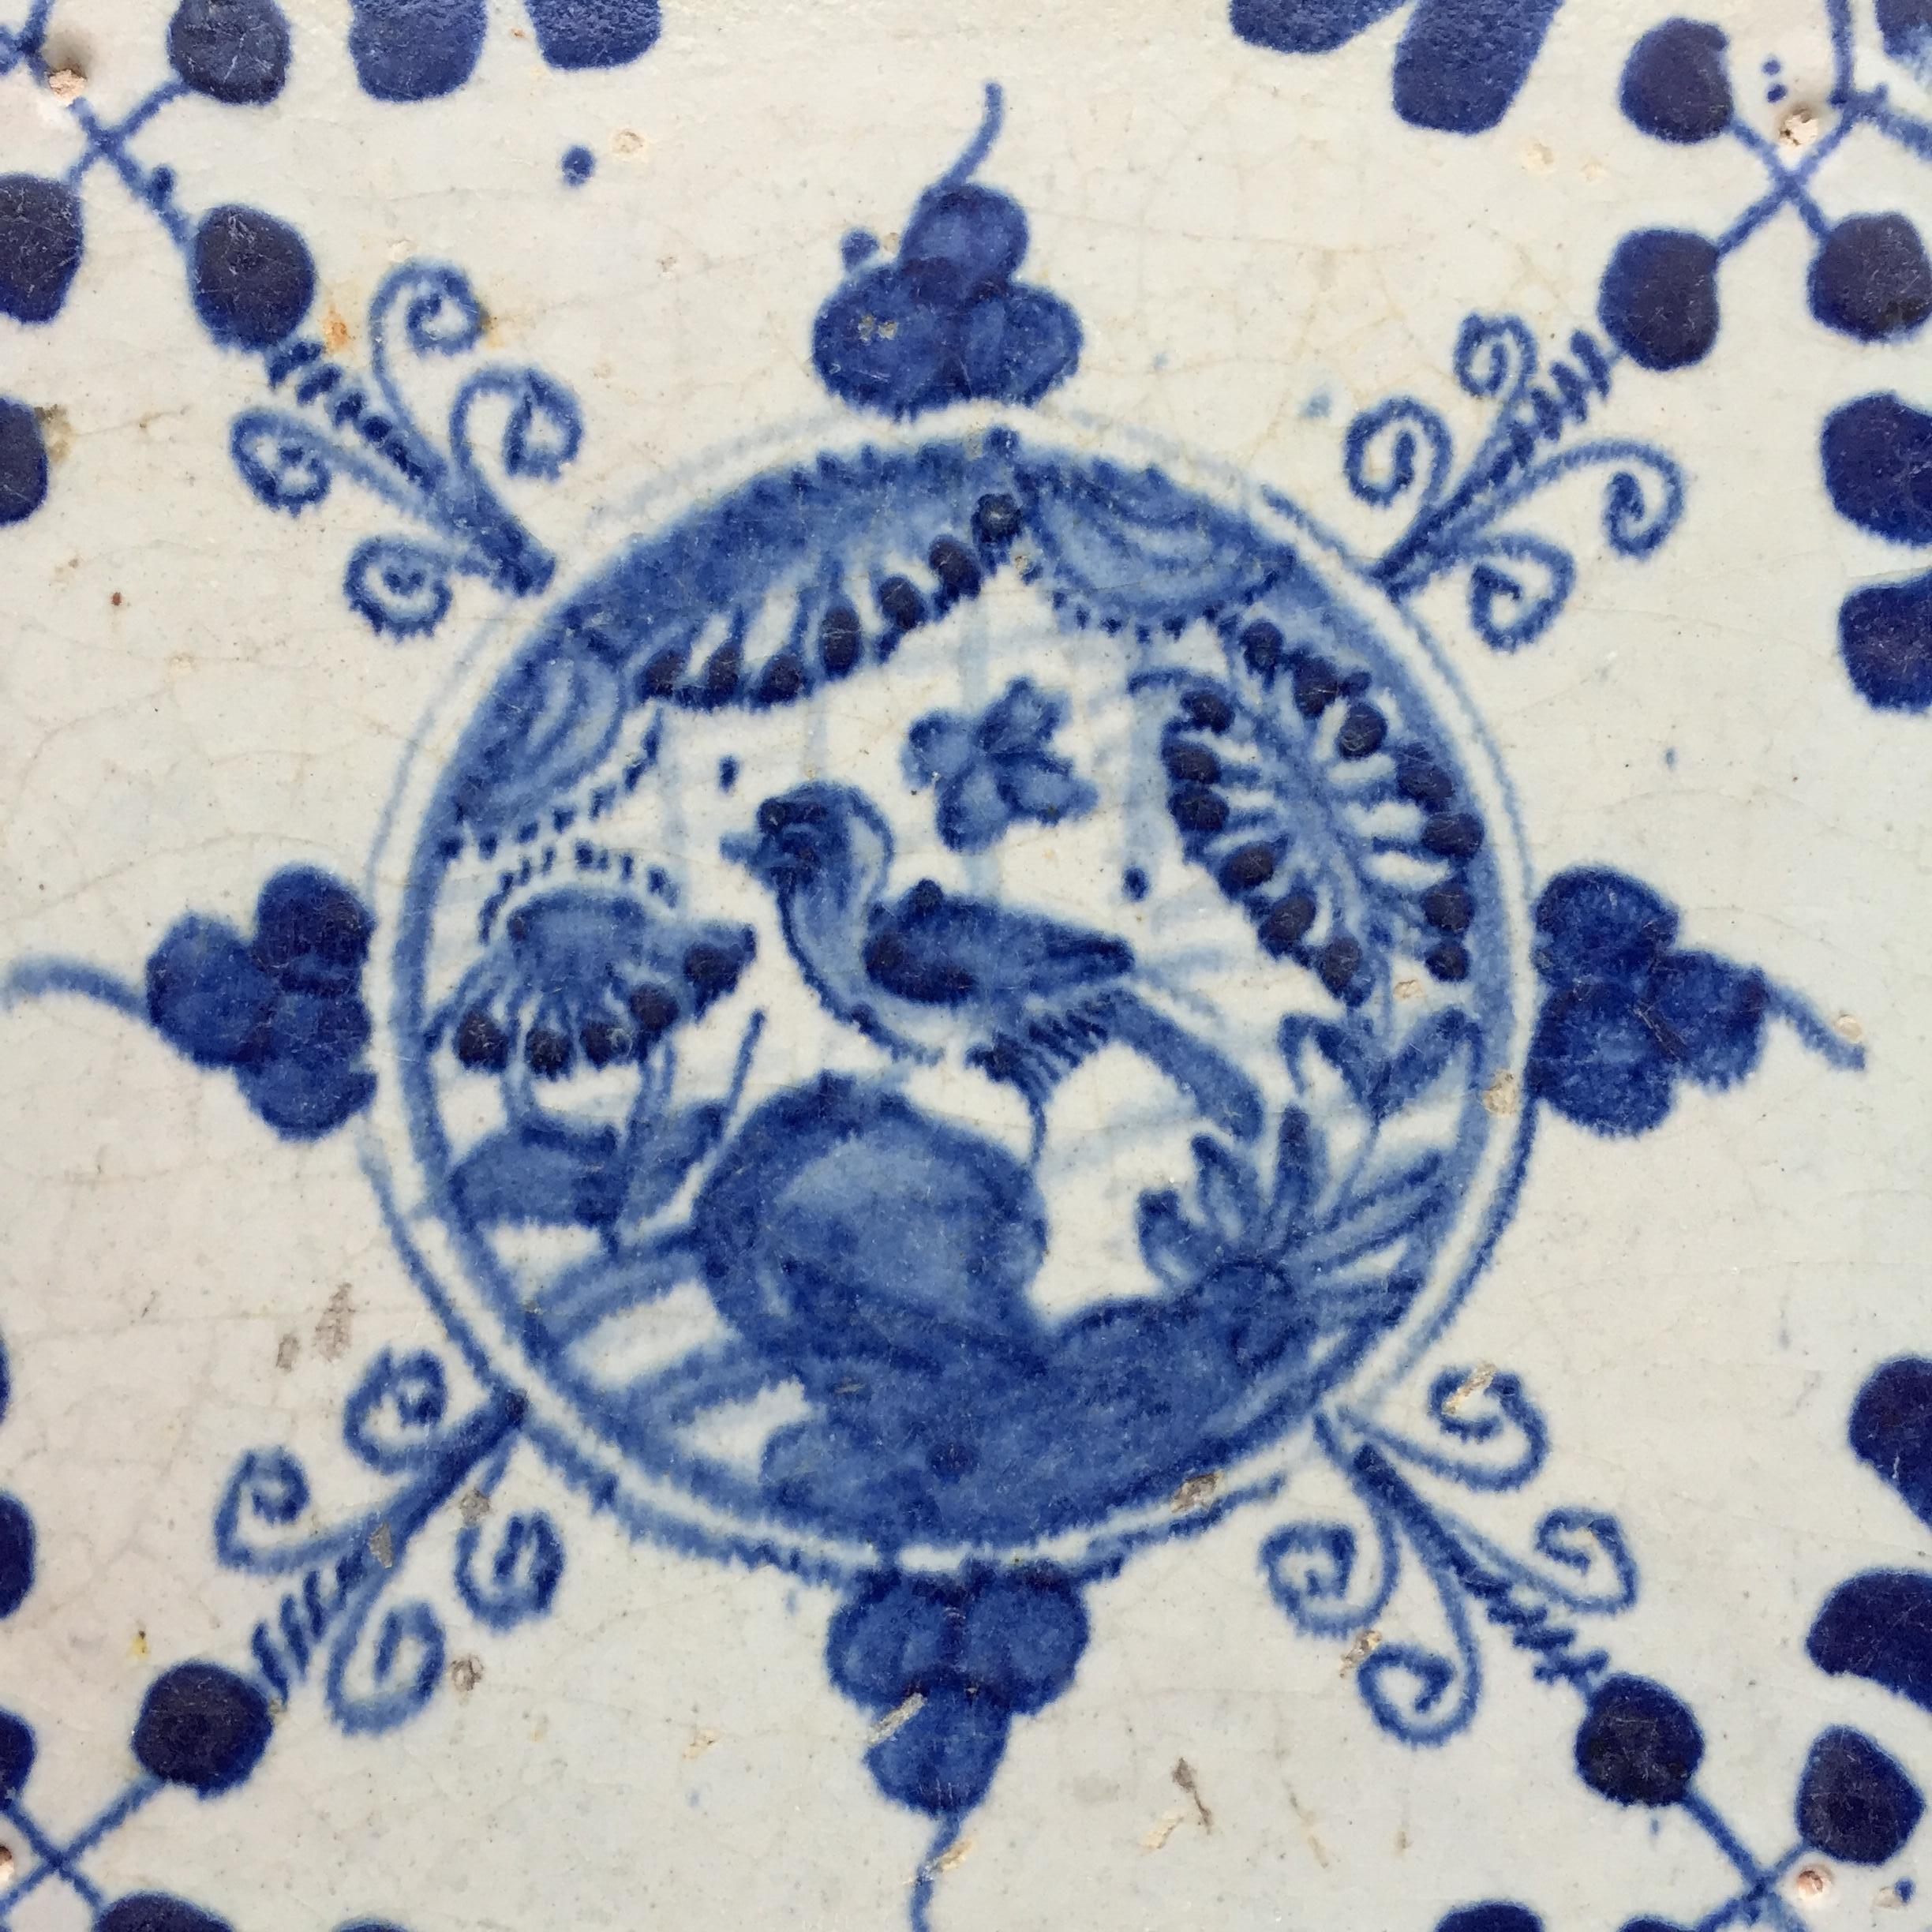 The Netherlands
Circa 1620 – 1640

A blue and white Dutch tile with a decoration of a Chinese garden with a bird on a rock. Influenced by the Chinese porcelain from the Wanli Period.
Painted in a circle with leaves and curls around the circle. In